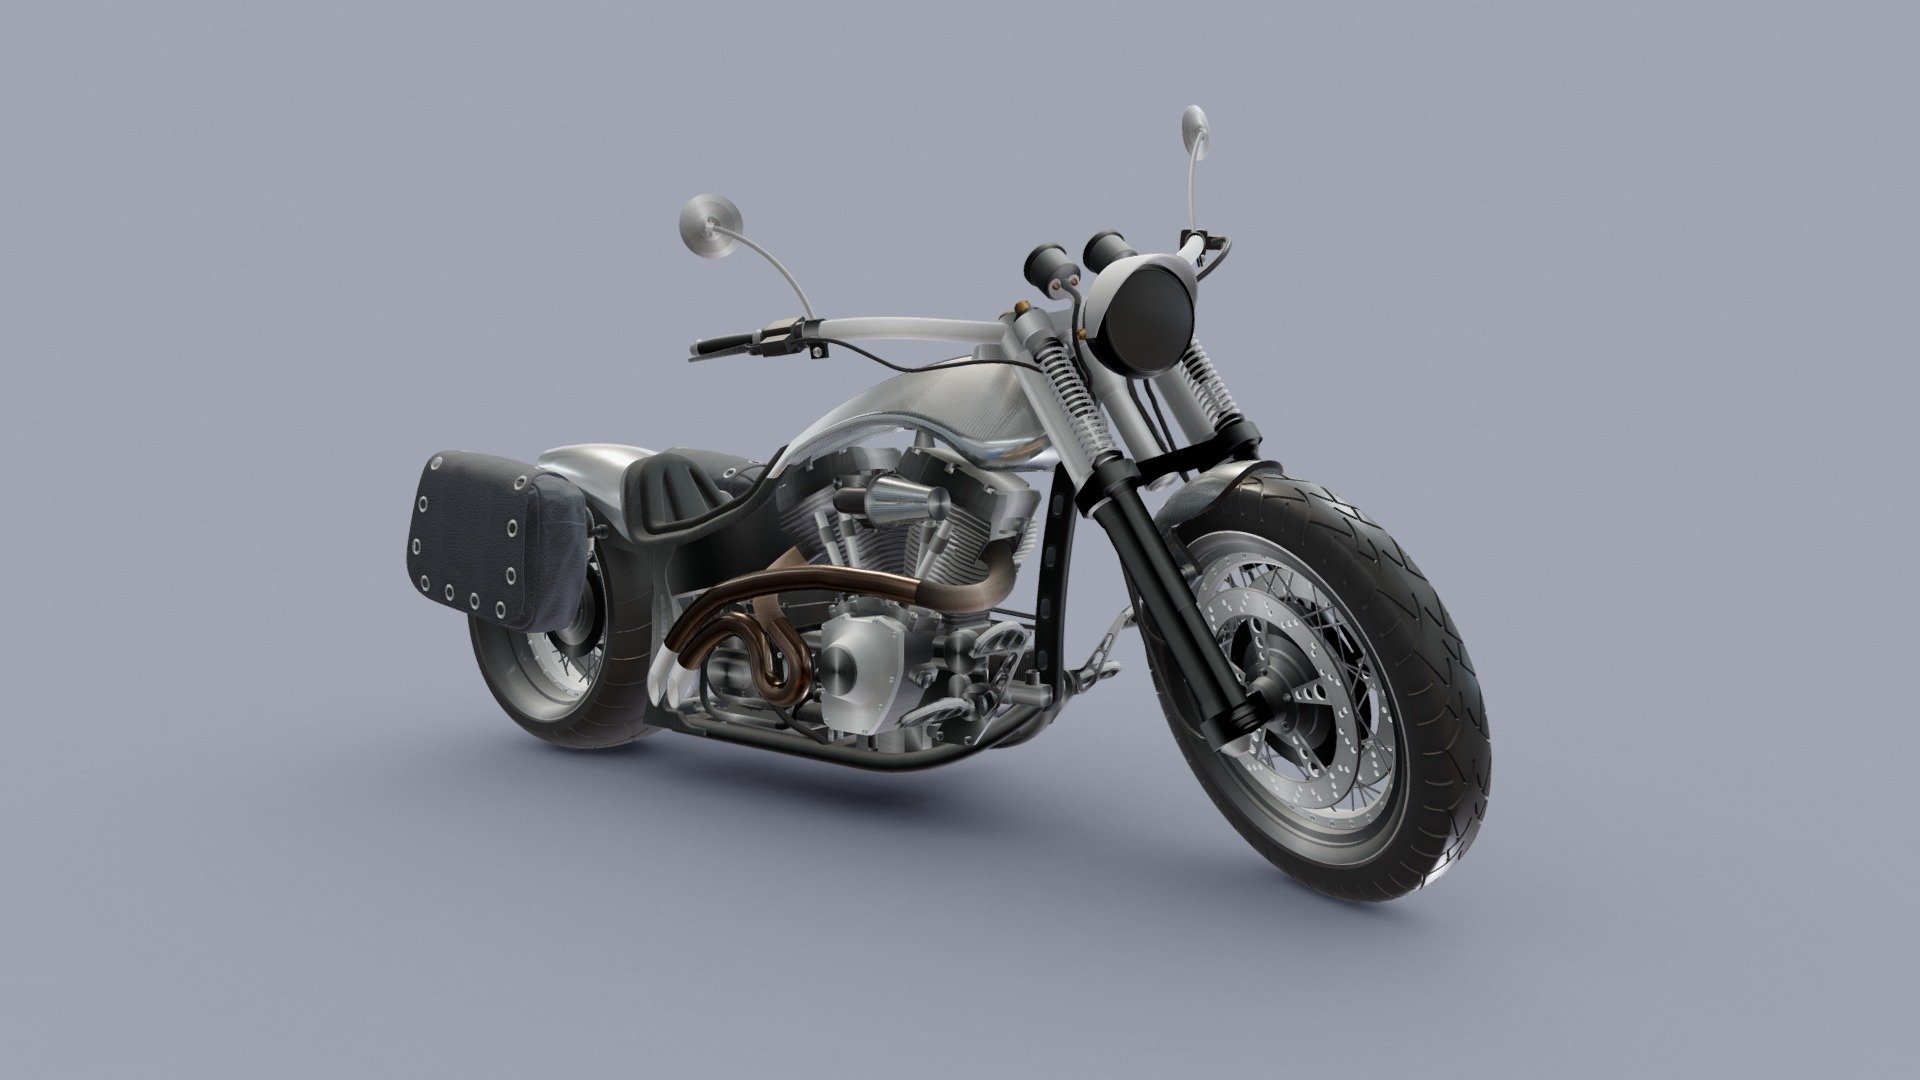 Could you please consider liking and subscribing to my account. Your support would mean a lot to me. Thank you! - 3d model Chopper - Buy Royalty Free 3D model by zizian 3d model